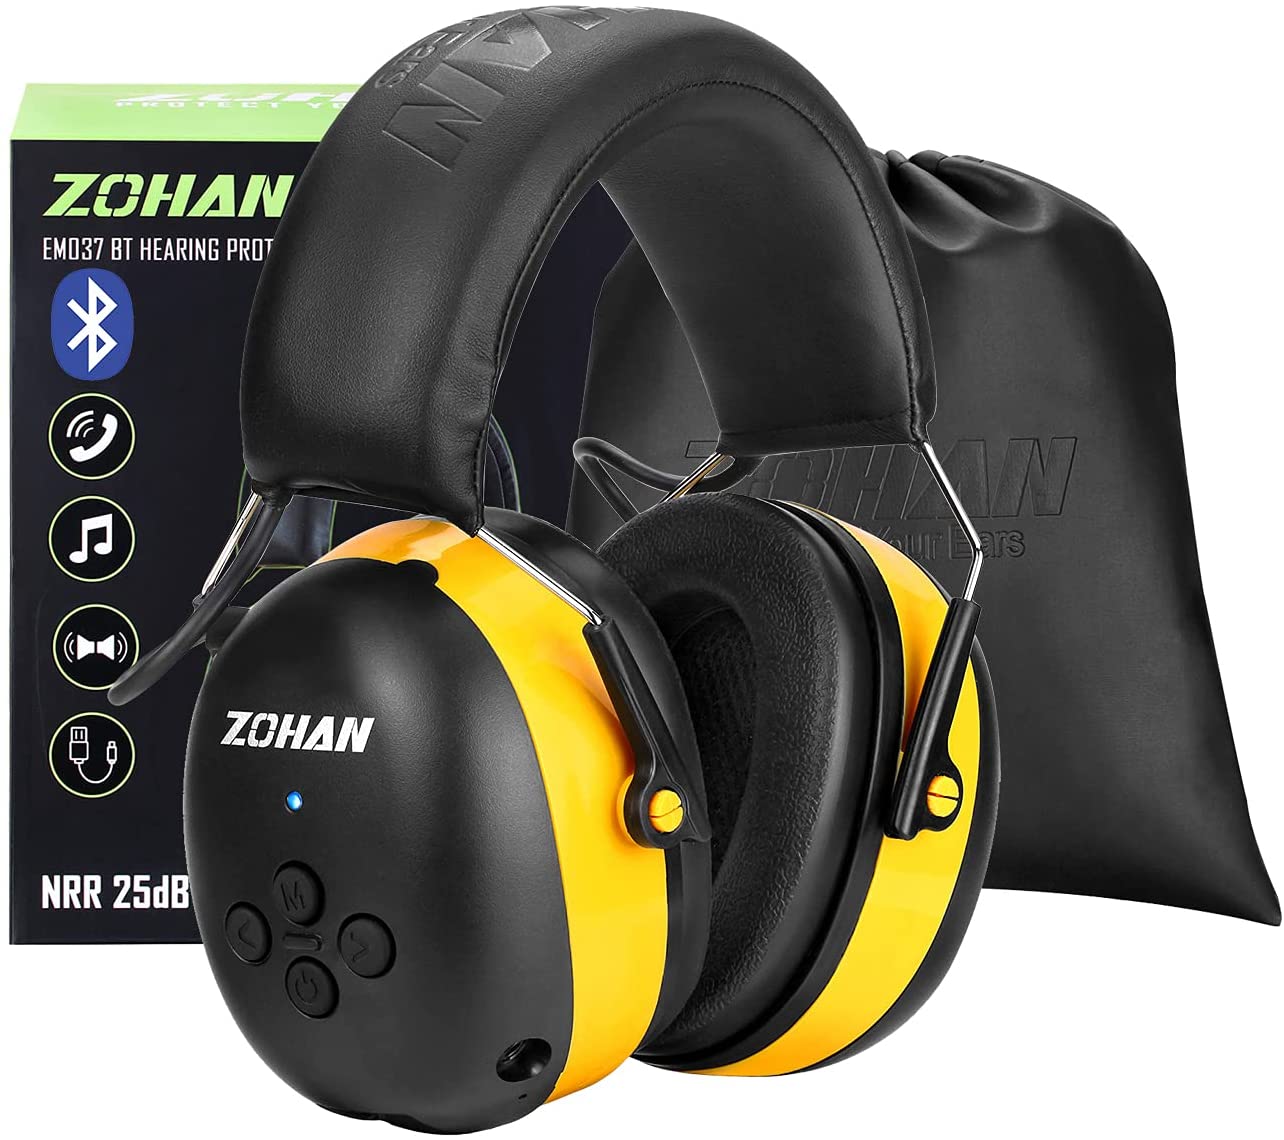 ZOHAN Hearing Protection Bluetooth headphone Earmuffs 5.0 Headphones Safety  Noise Reduction 25dB NRR Protector for Mowing Music